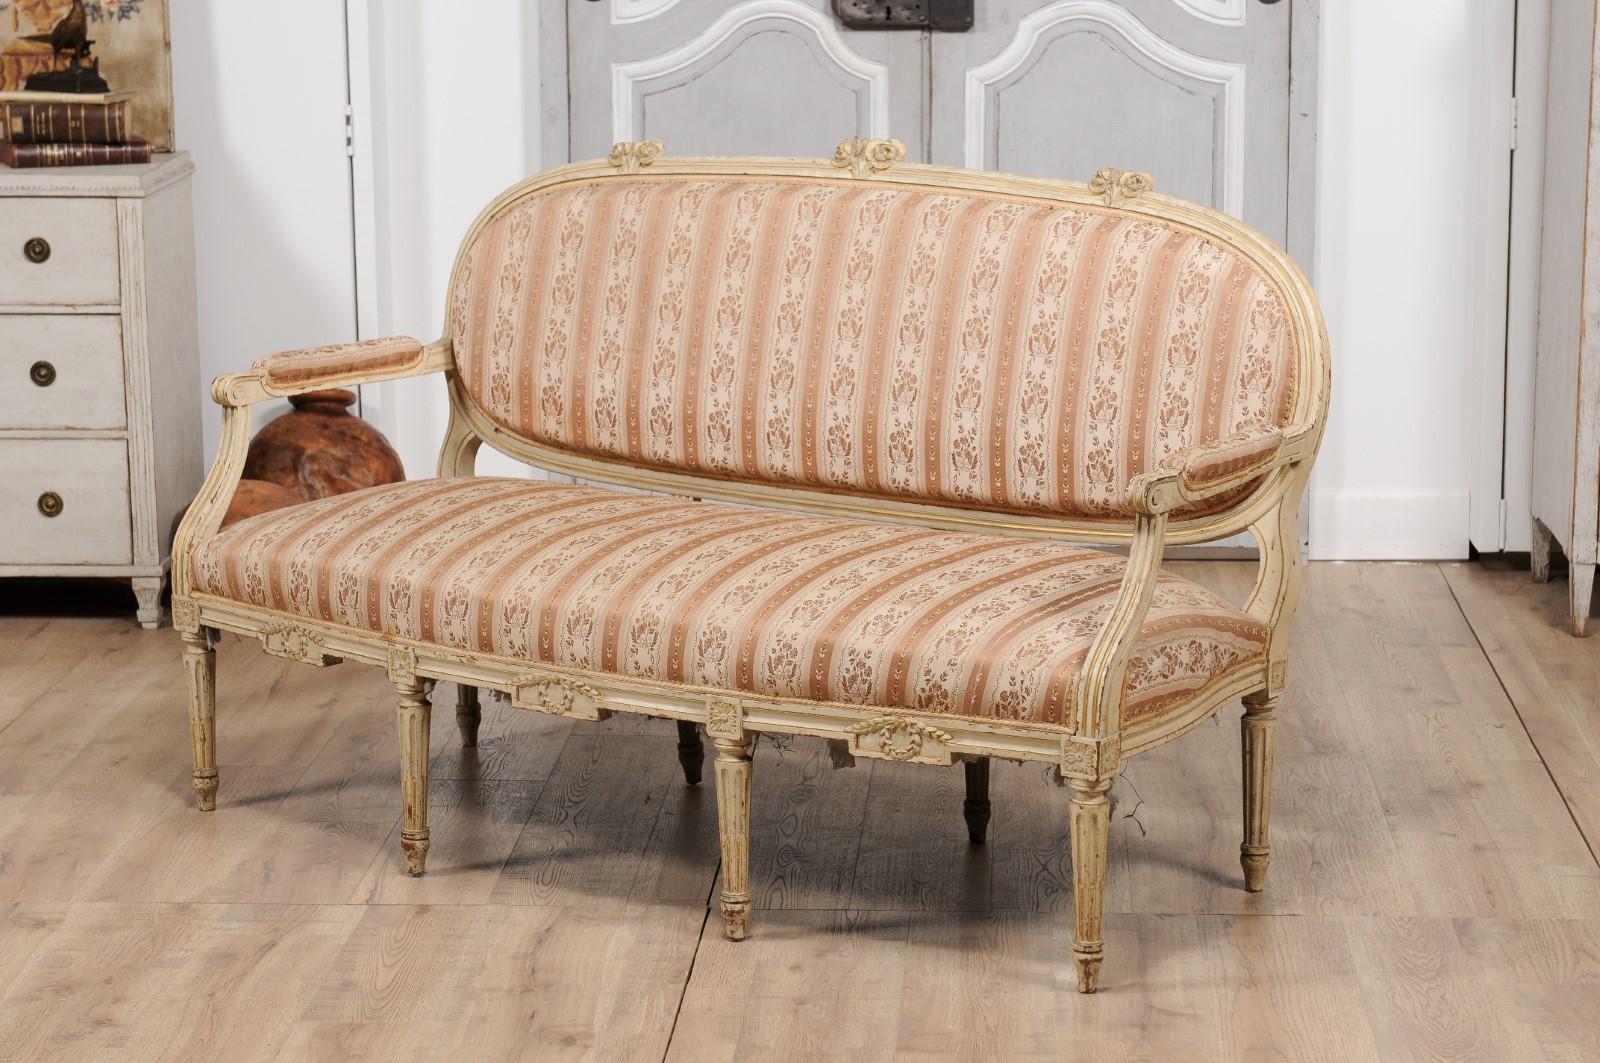 1790s Louis XVI Period French Painted Sofa with Oval Back and Carved Foliage For Sale 7